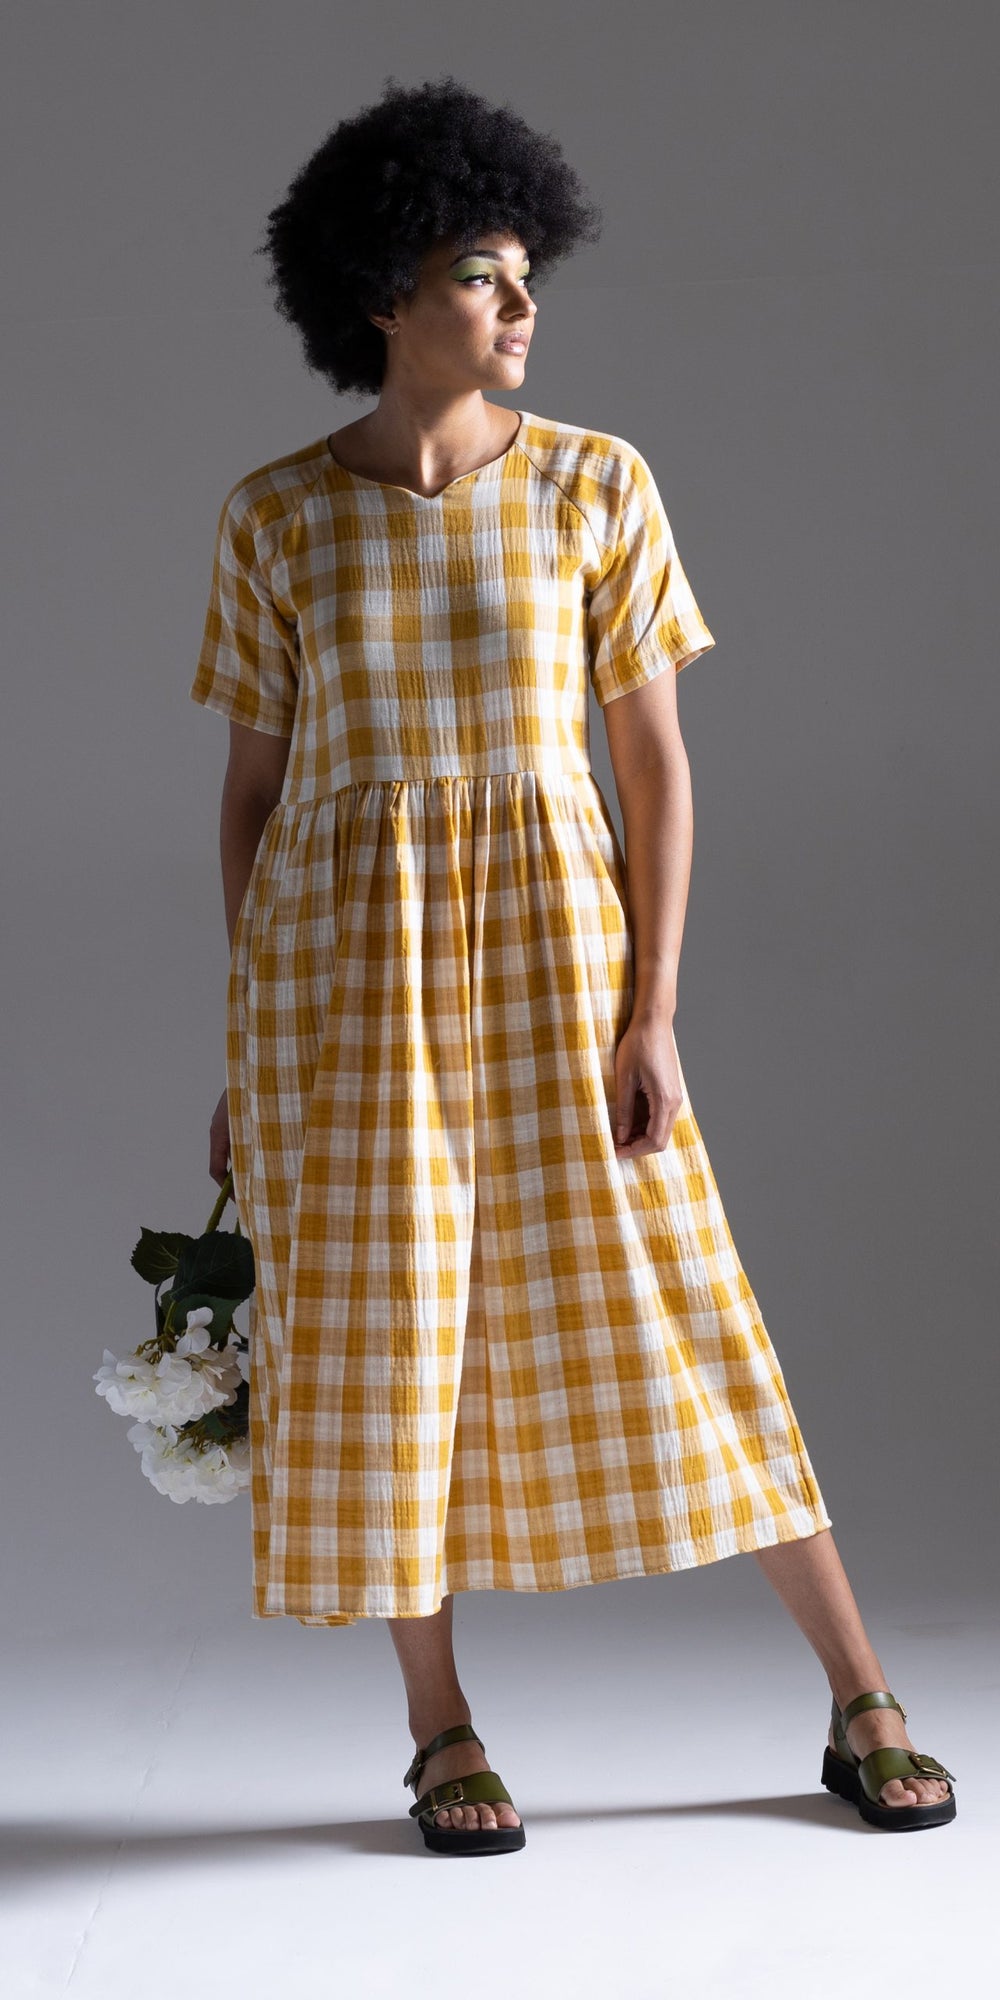 Women wearing the Ripple Dress sewing pattern from Sew Different on The Fold Line. A dress pattern made in viscose, crepe, cotton lawn, and lightweight linen fabrics, featuring a loose-fit, peasant-style, boxy bodice with notched neckline, elbow-length ra